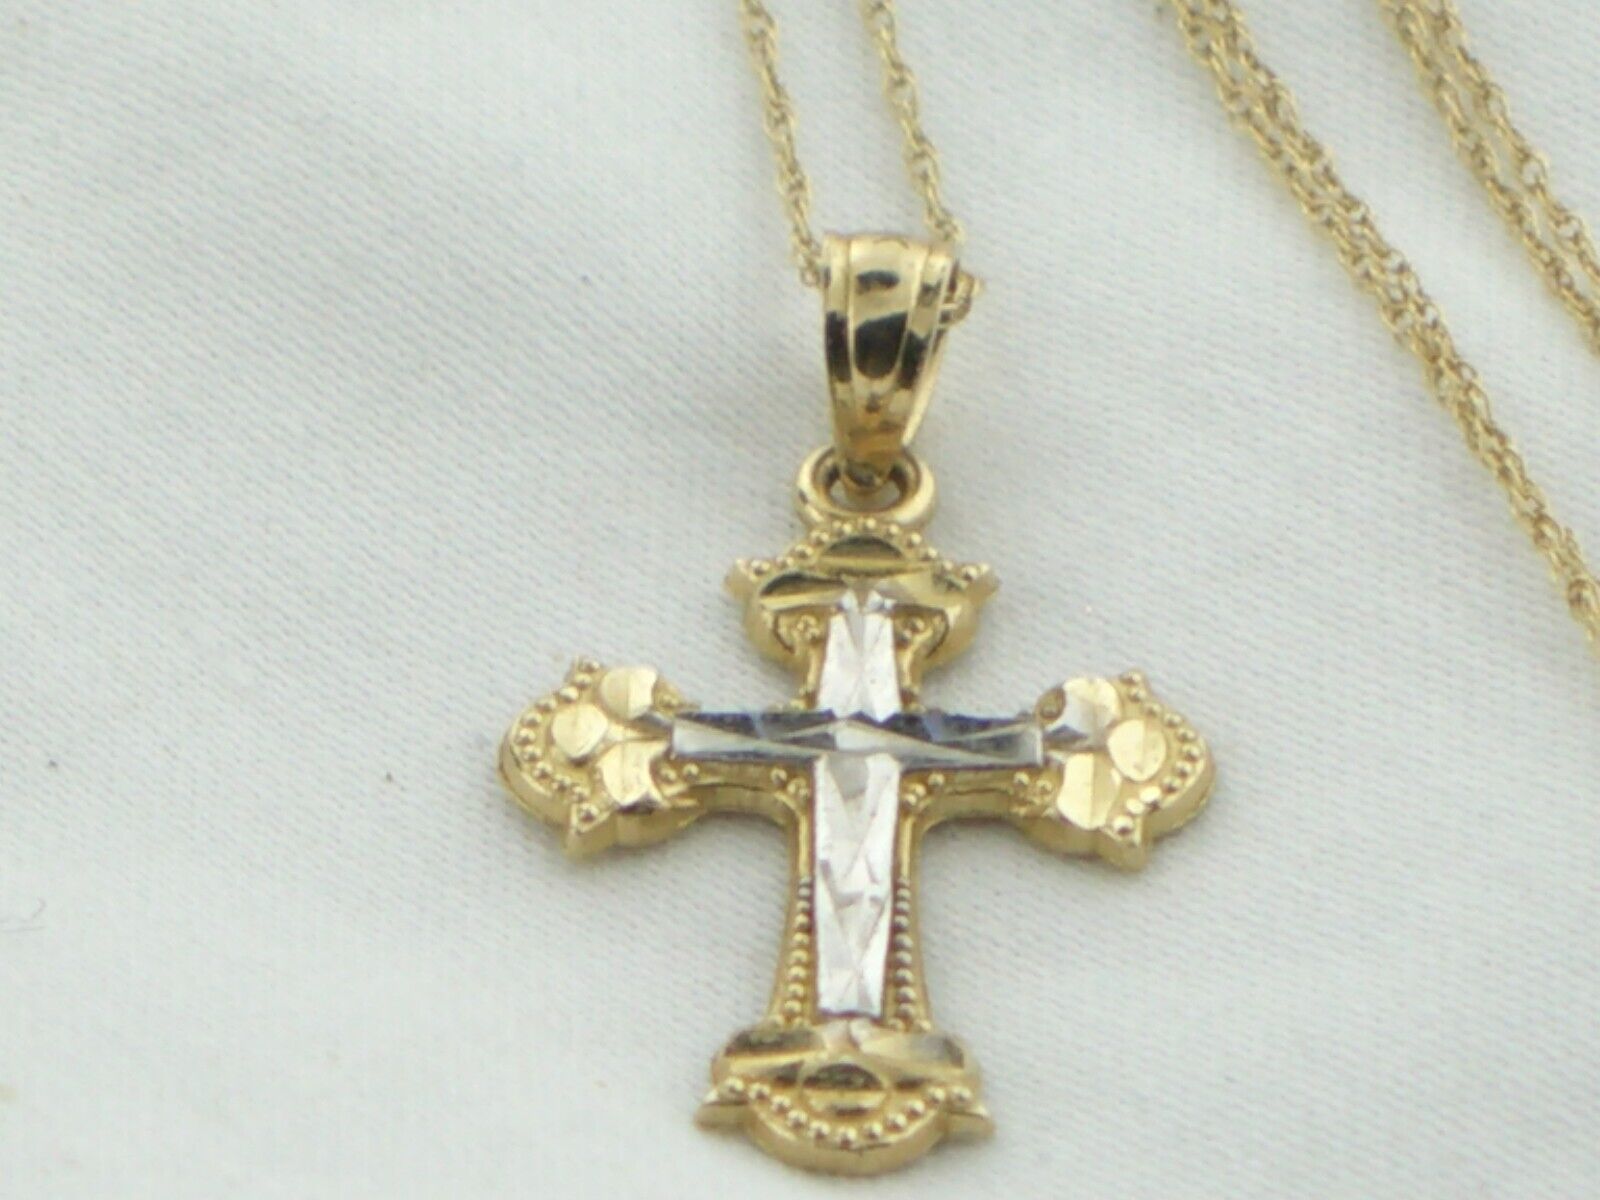 10K White & Yellow Gold Religious Cross Pendant Michael Anthony Chain Necklace